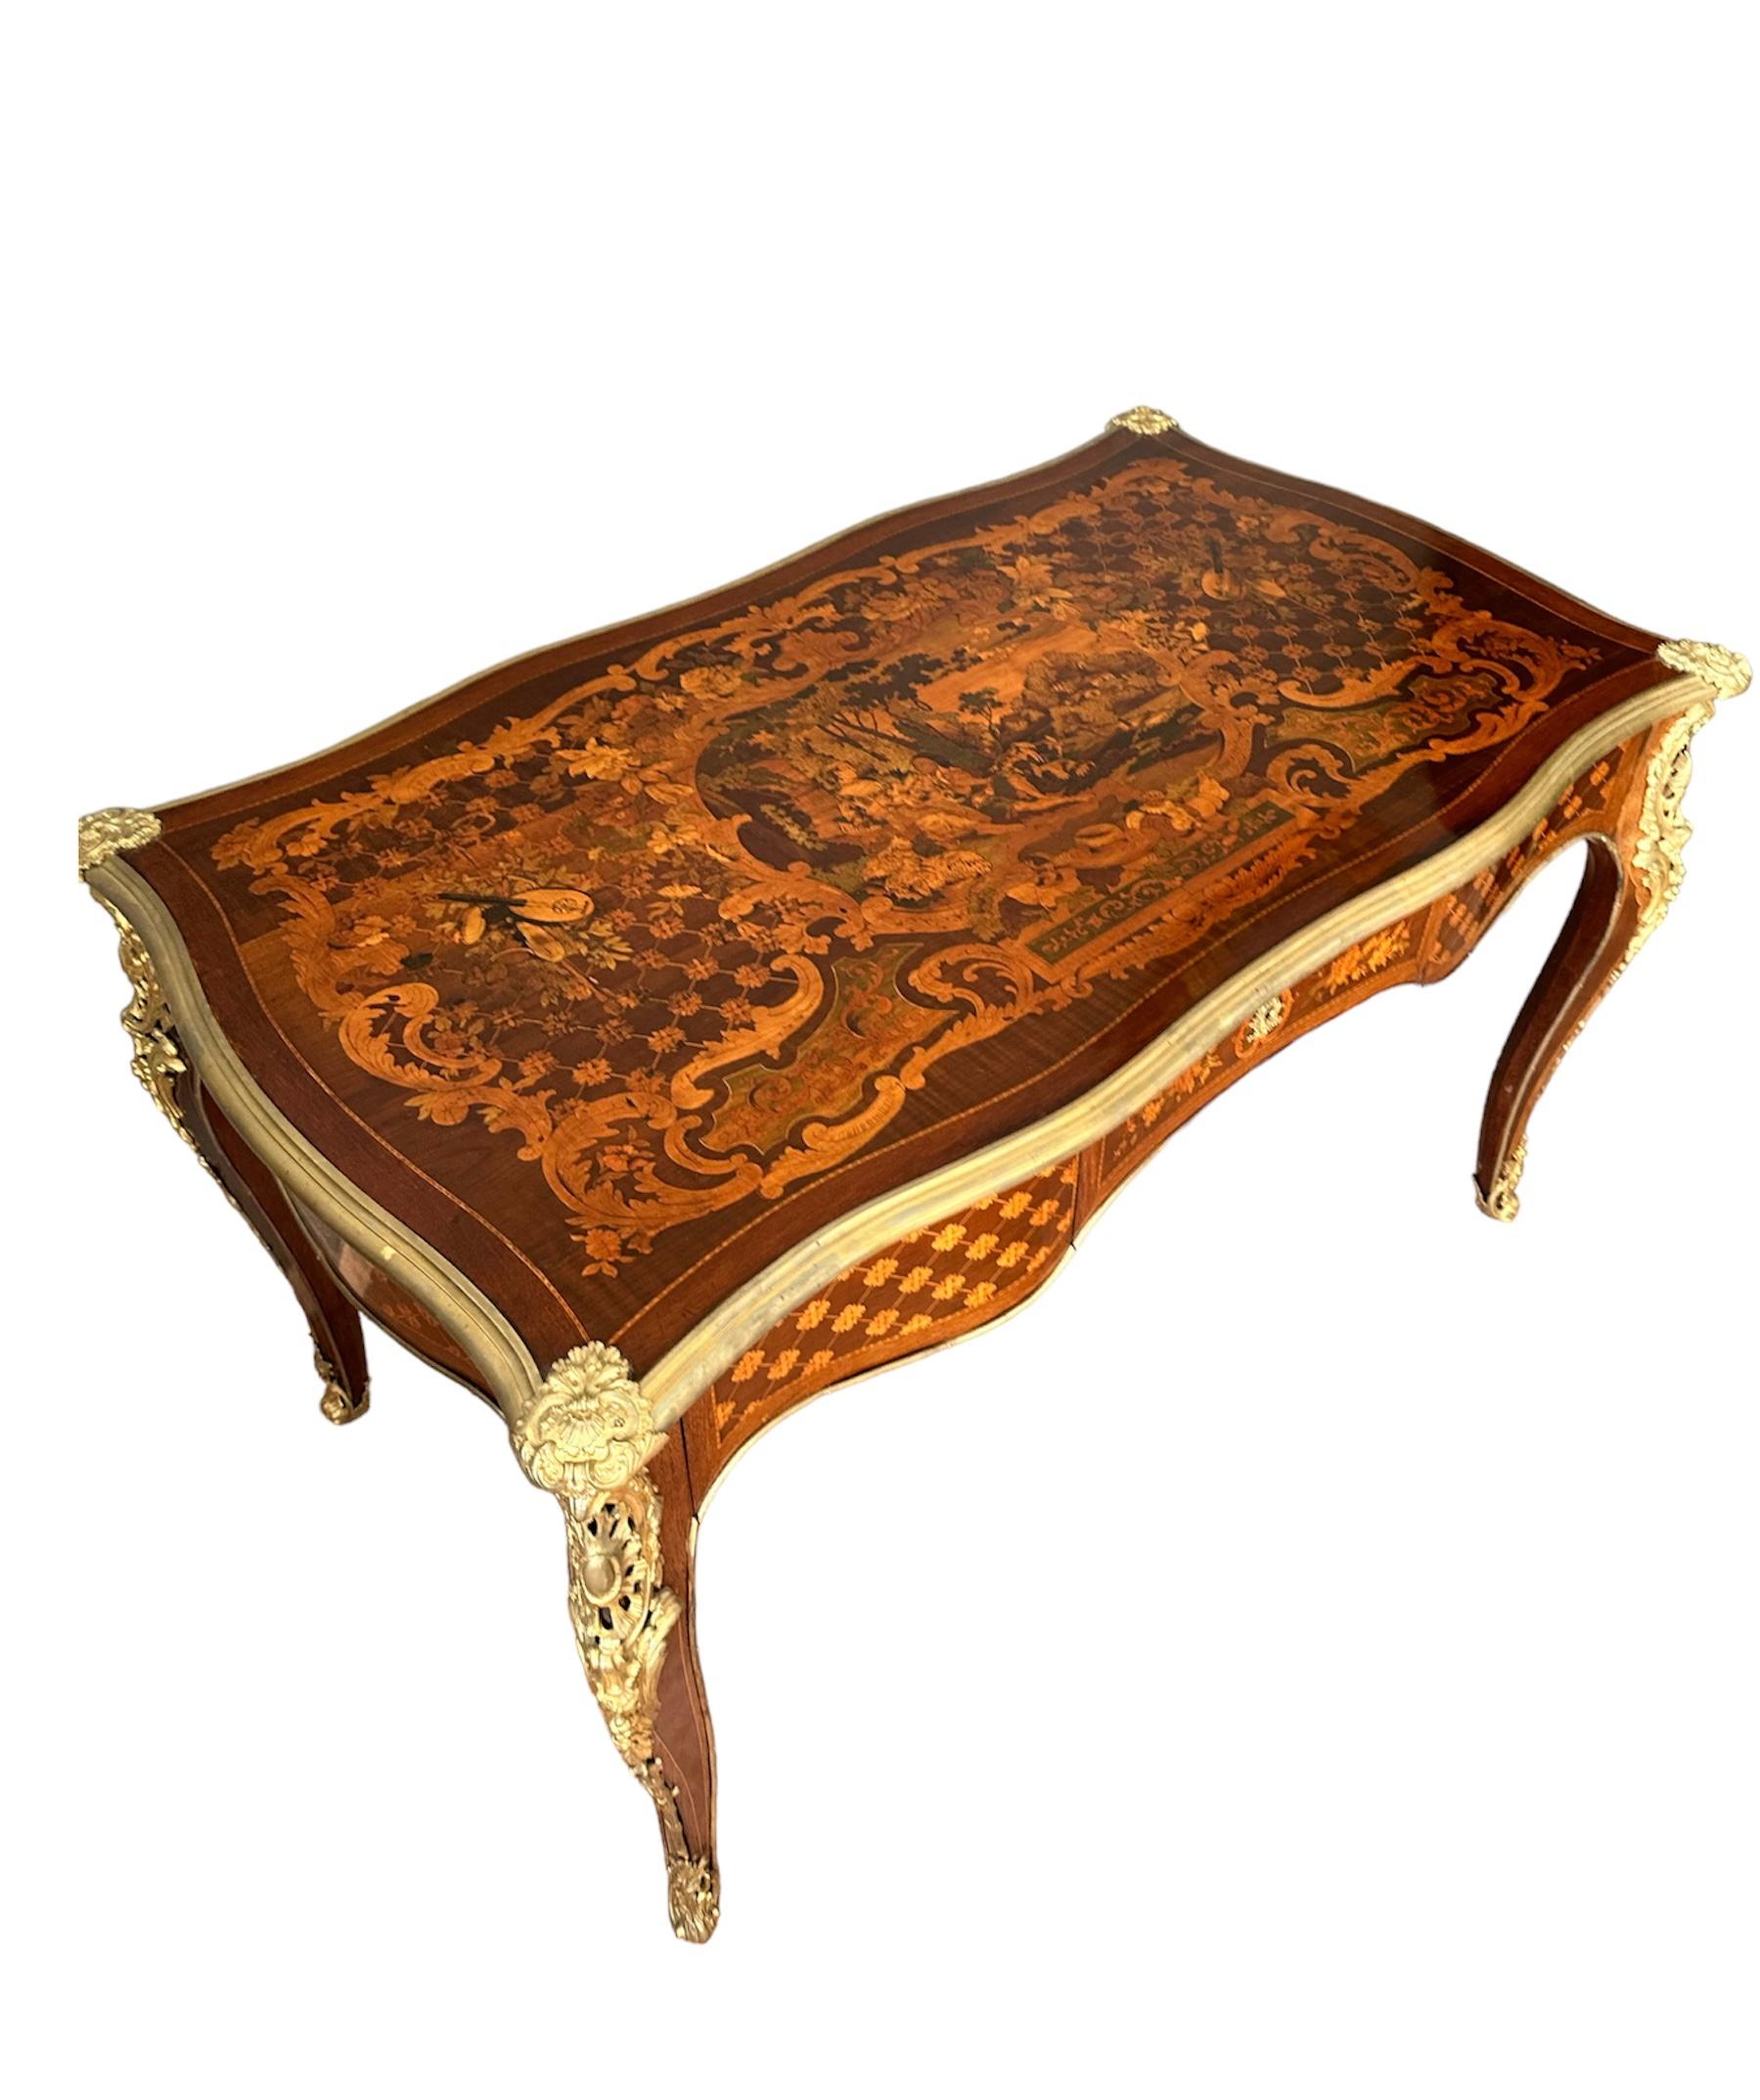 Gilt 19th Century Inlaid Desk Mounted with Gilded Bronzes, by Paul Sormani